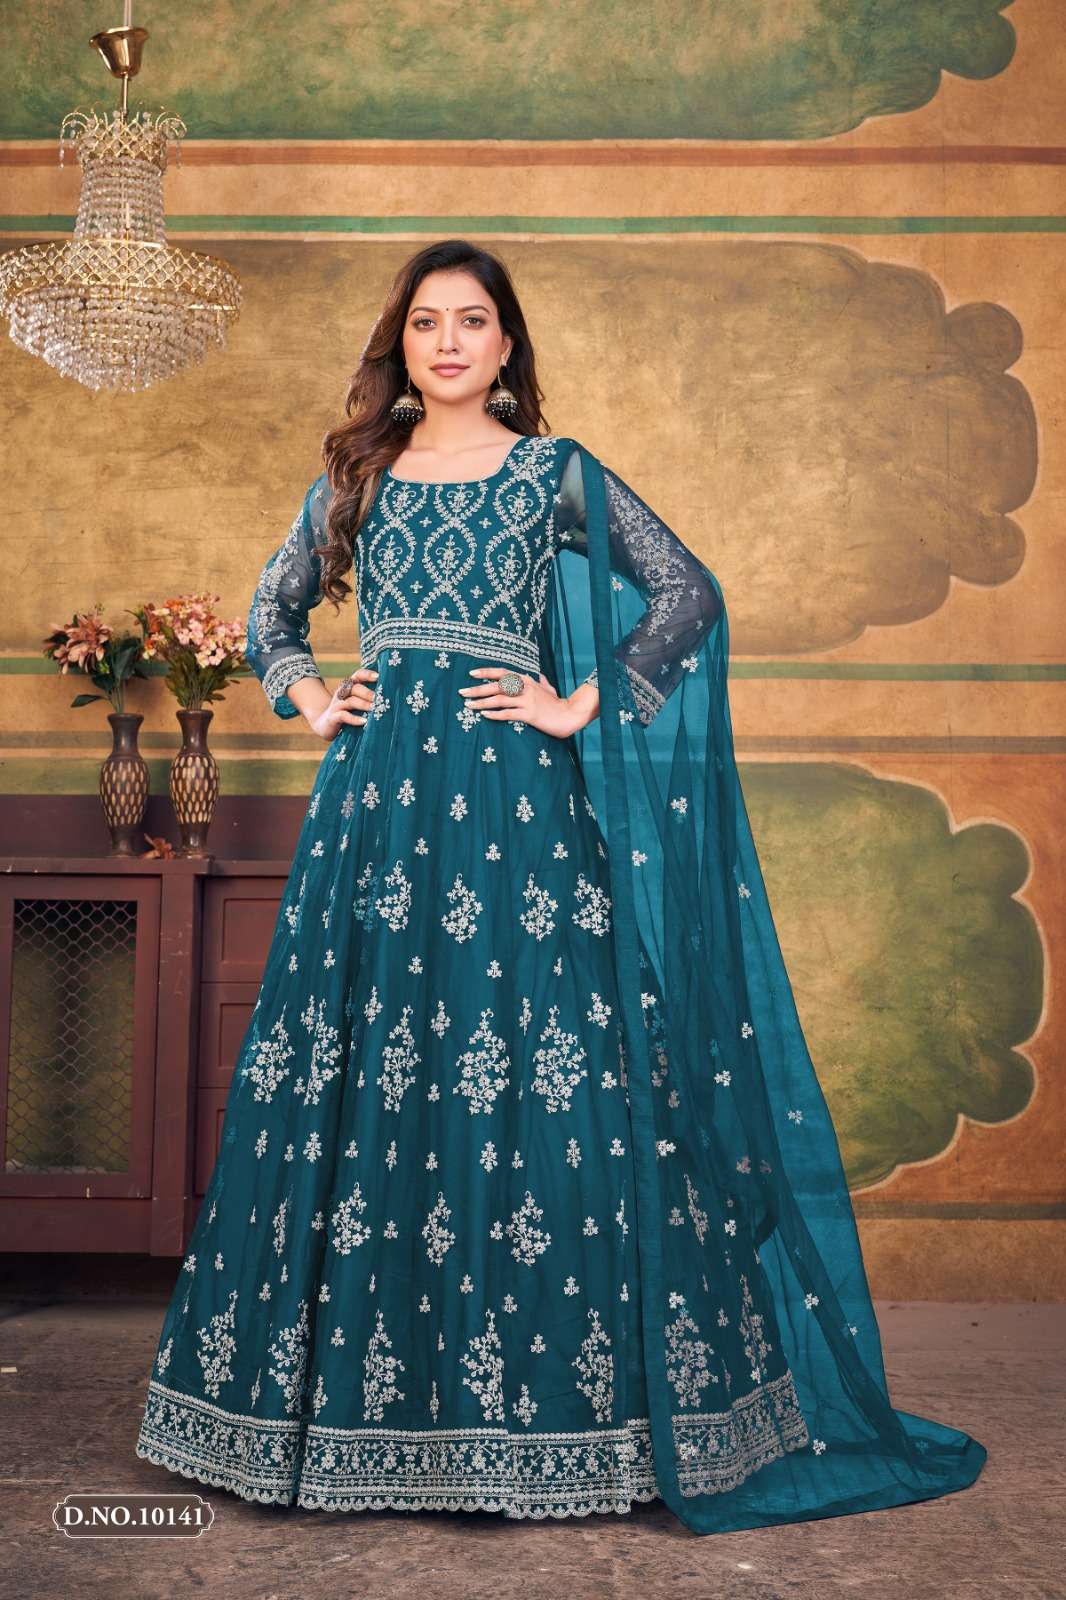 anjubaa vol 14 design number 10141 to 10144 designer heavy embroidery partywear anarkali gown style dress suit 